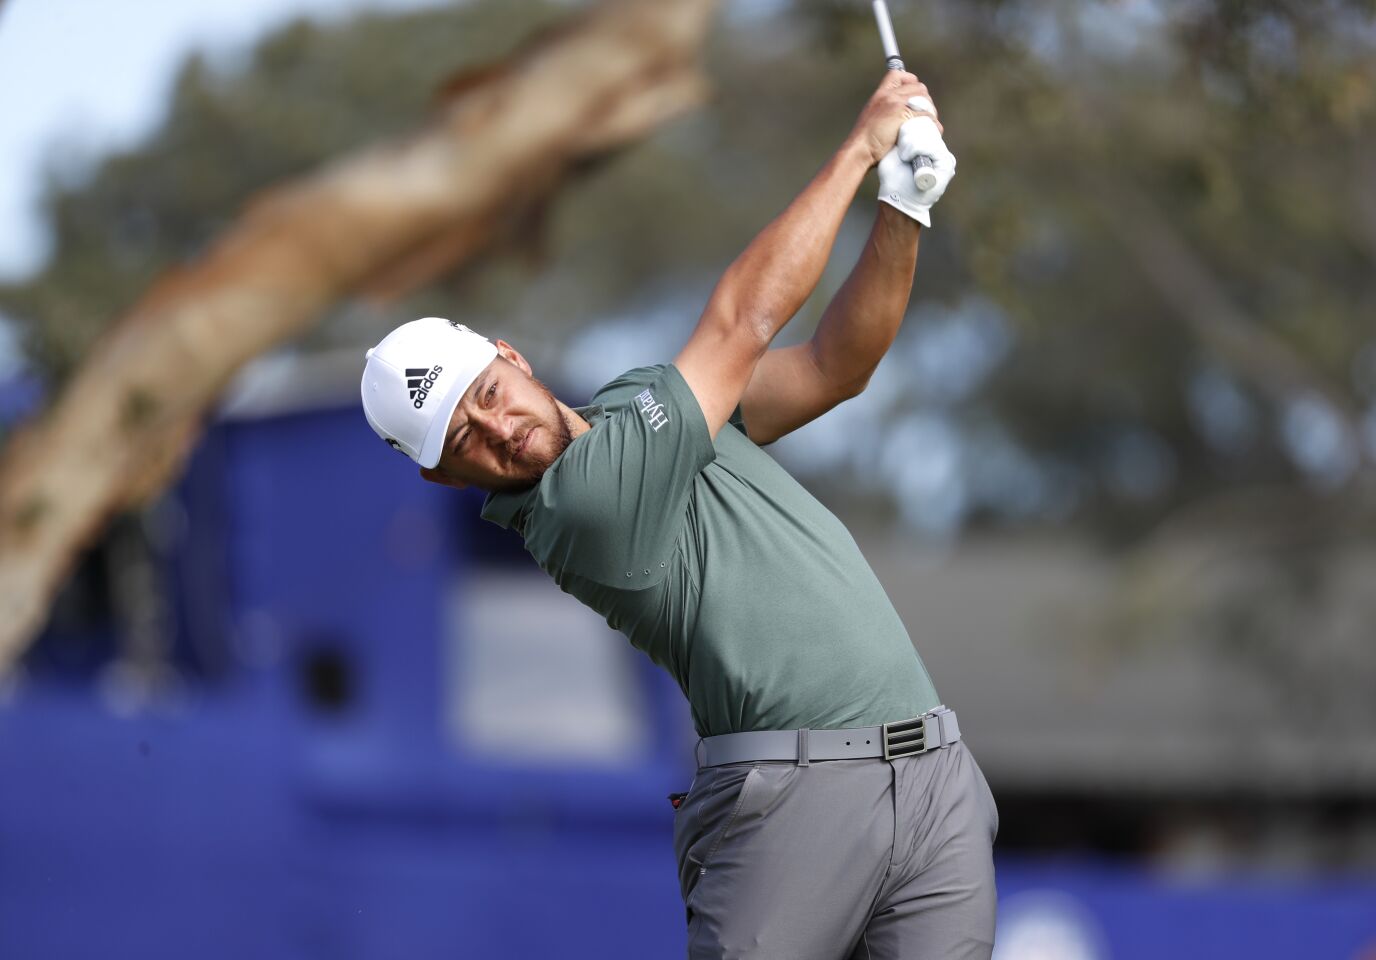 SAN DIEGO, CA - JANUARY 31: Xander Schauffele tees off on the 8th hole during final round of the Farmers Insurance Open at Torrey Pines on Sunday, Jan. 31, 2021 in San Diego, CA. (K.C. Alfred / The San Diego Union-Tribune)